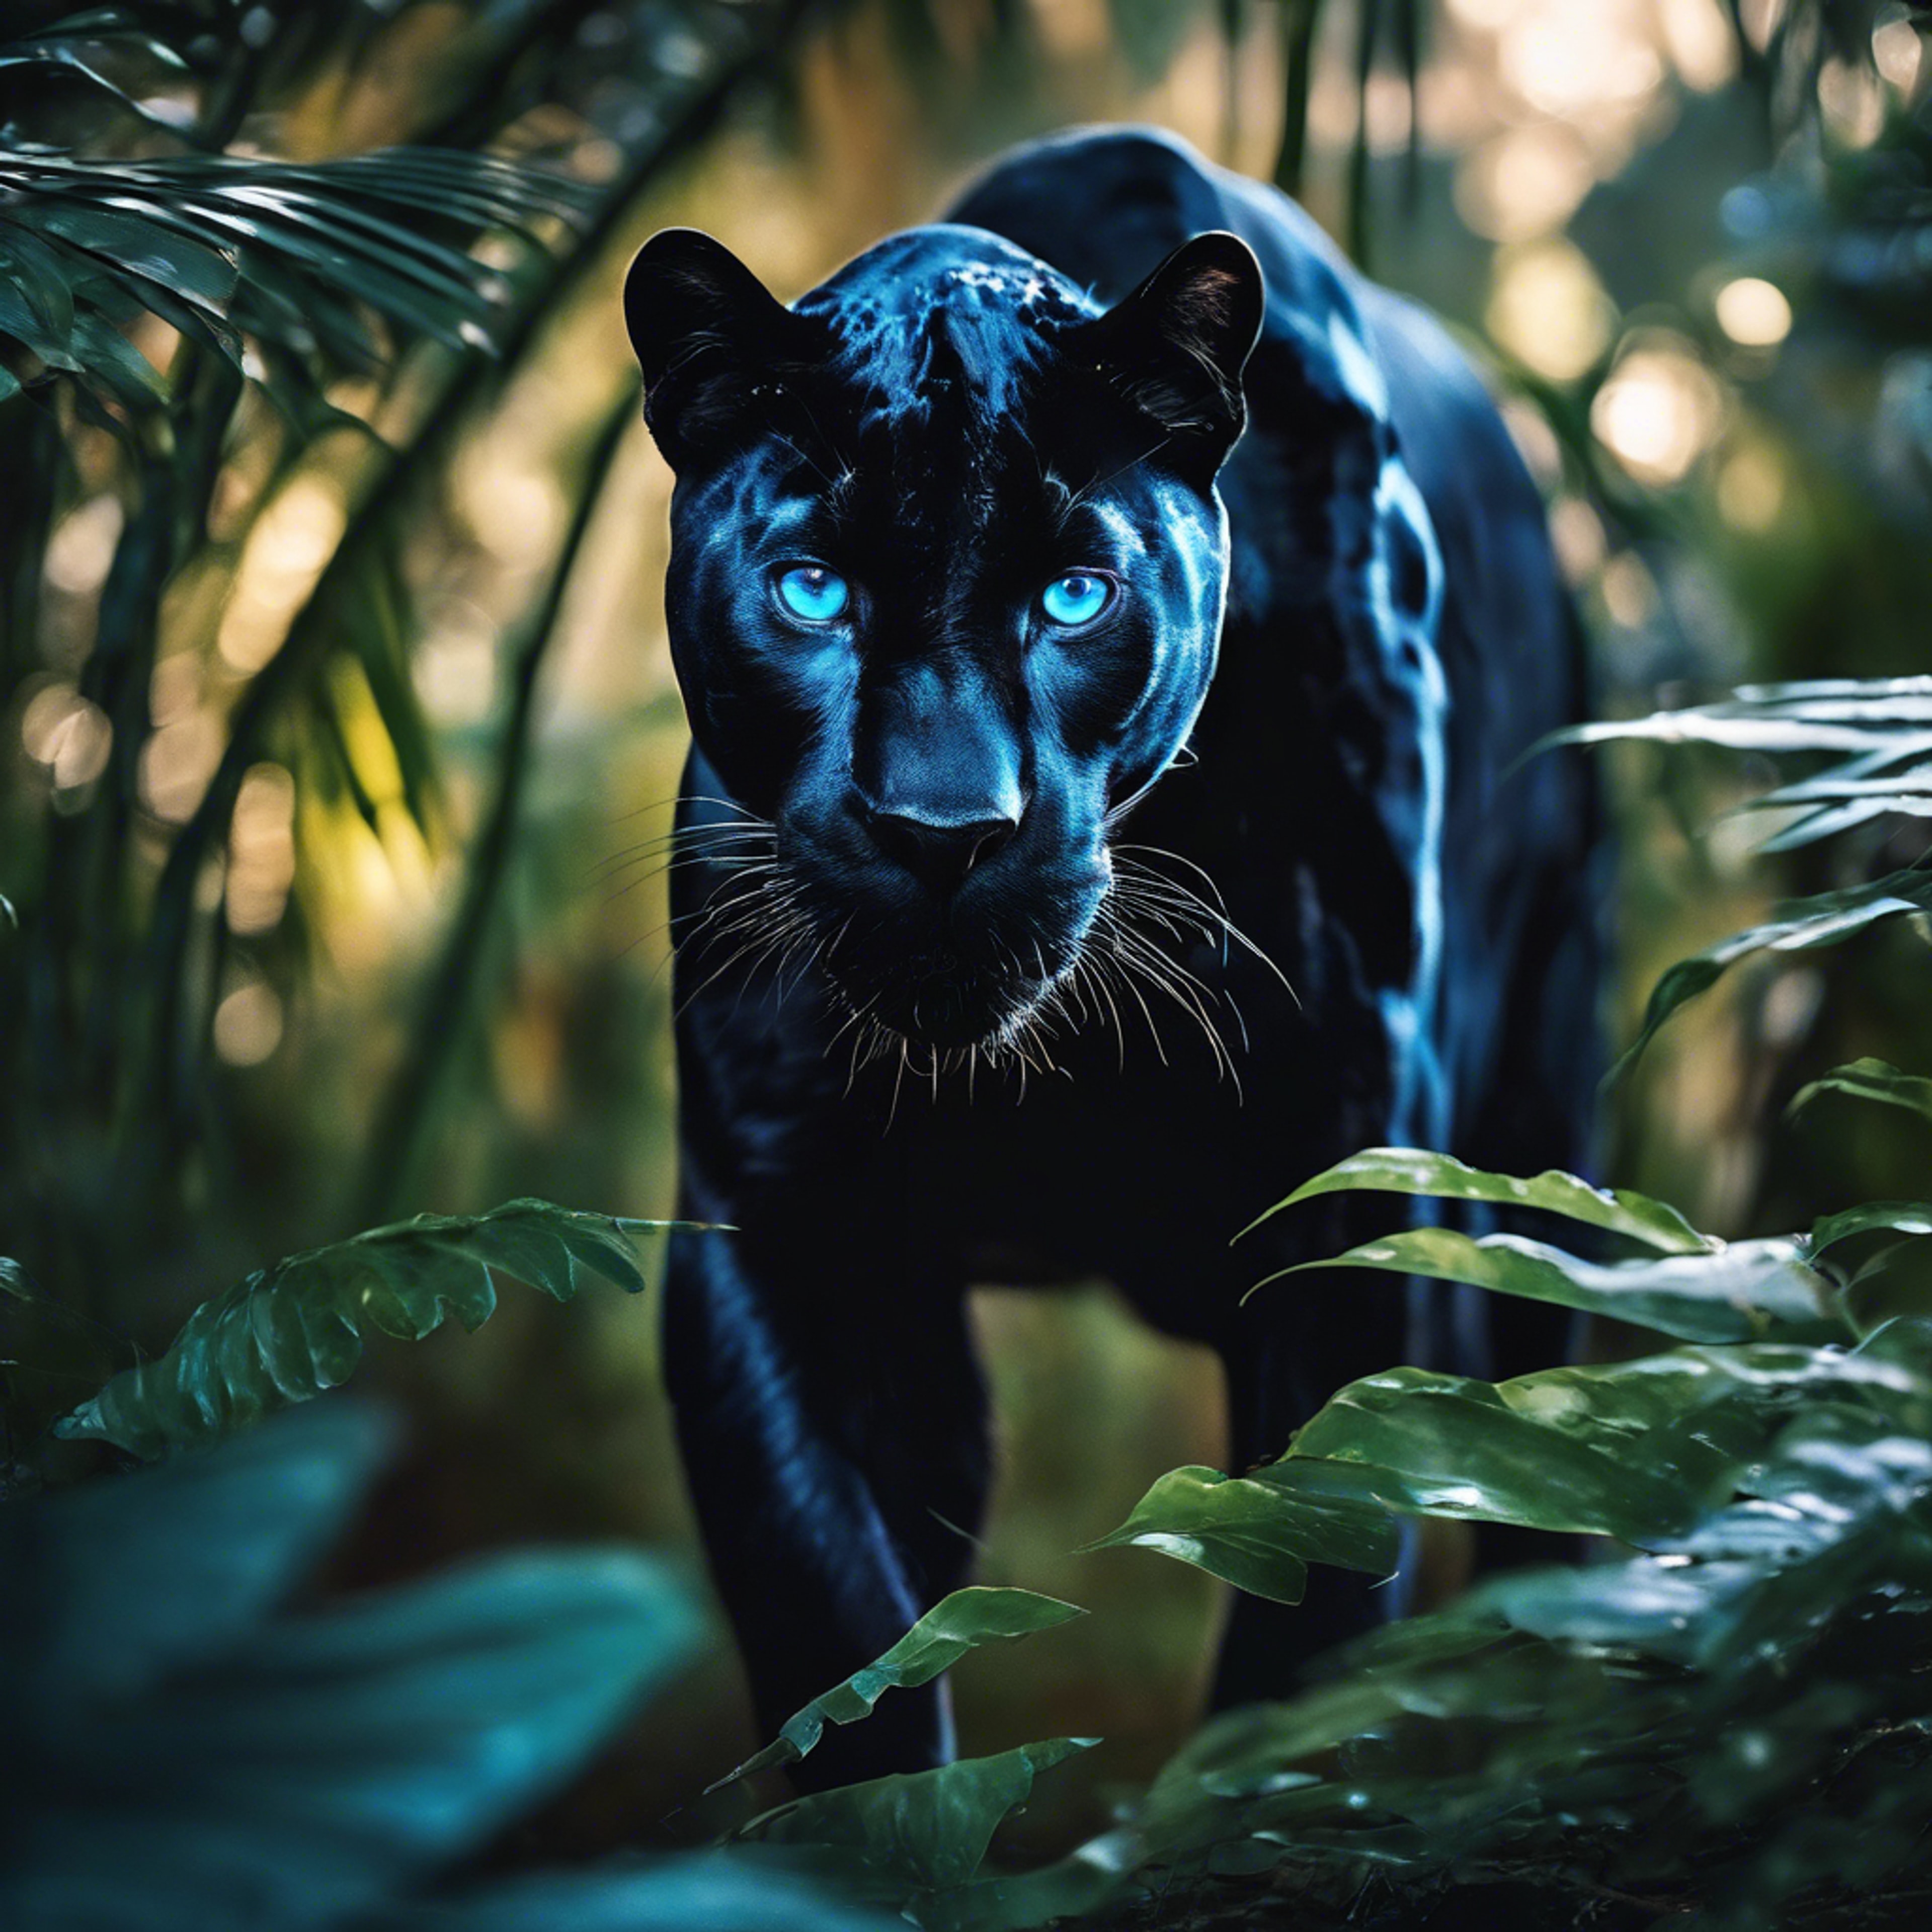 A midnight black panther with electric-blue eyes prowling in a moonlit jungle.壁紙[eb354cc6a19348d1a314]